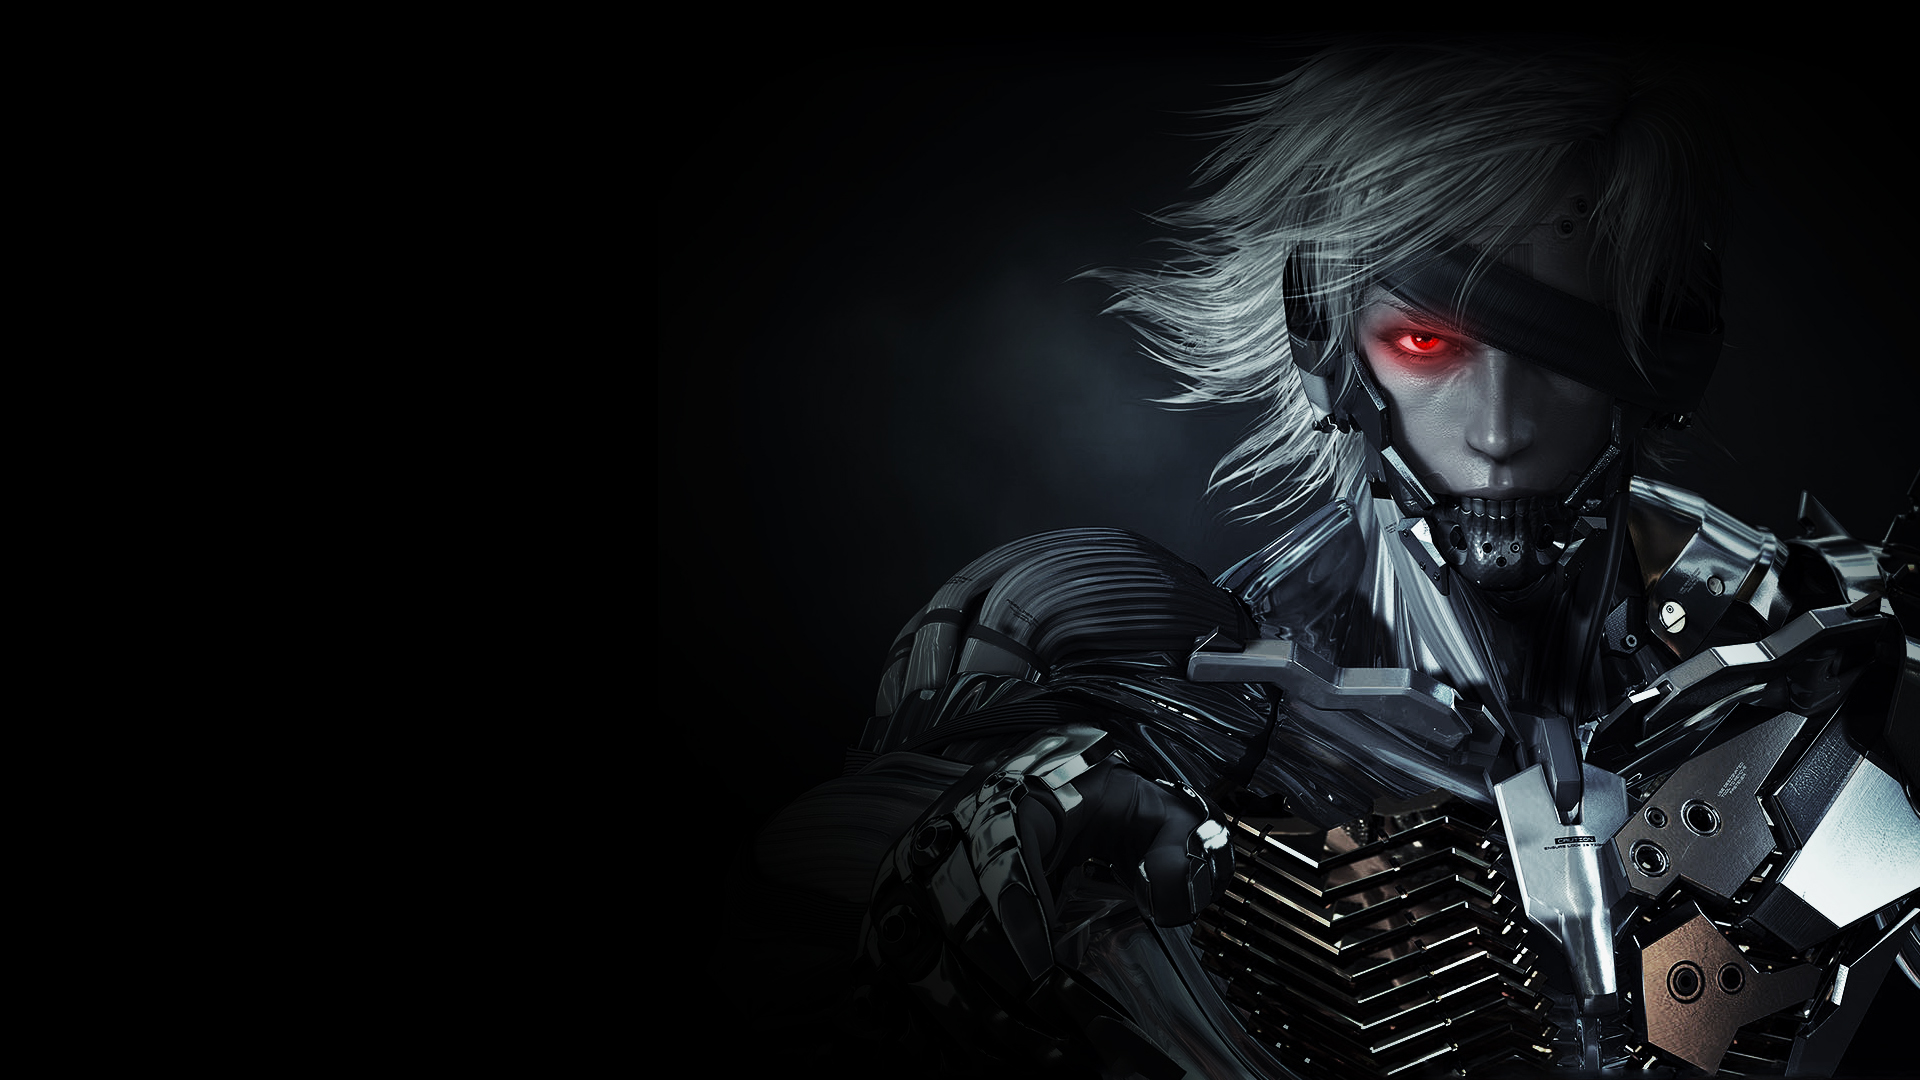 Free Download Raiden Mgs Rising Hd Wallpaper By Liquidraiden 19x1080 For Your Desktop Mobile Tablet Explore 76 Mgs Wallpaper Metal Gear Solid 3 Wallpaper Metal Gear Solid Desktop Wallpaper